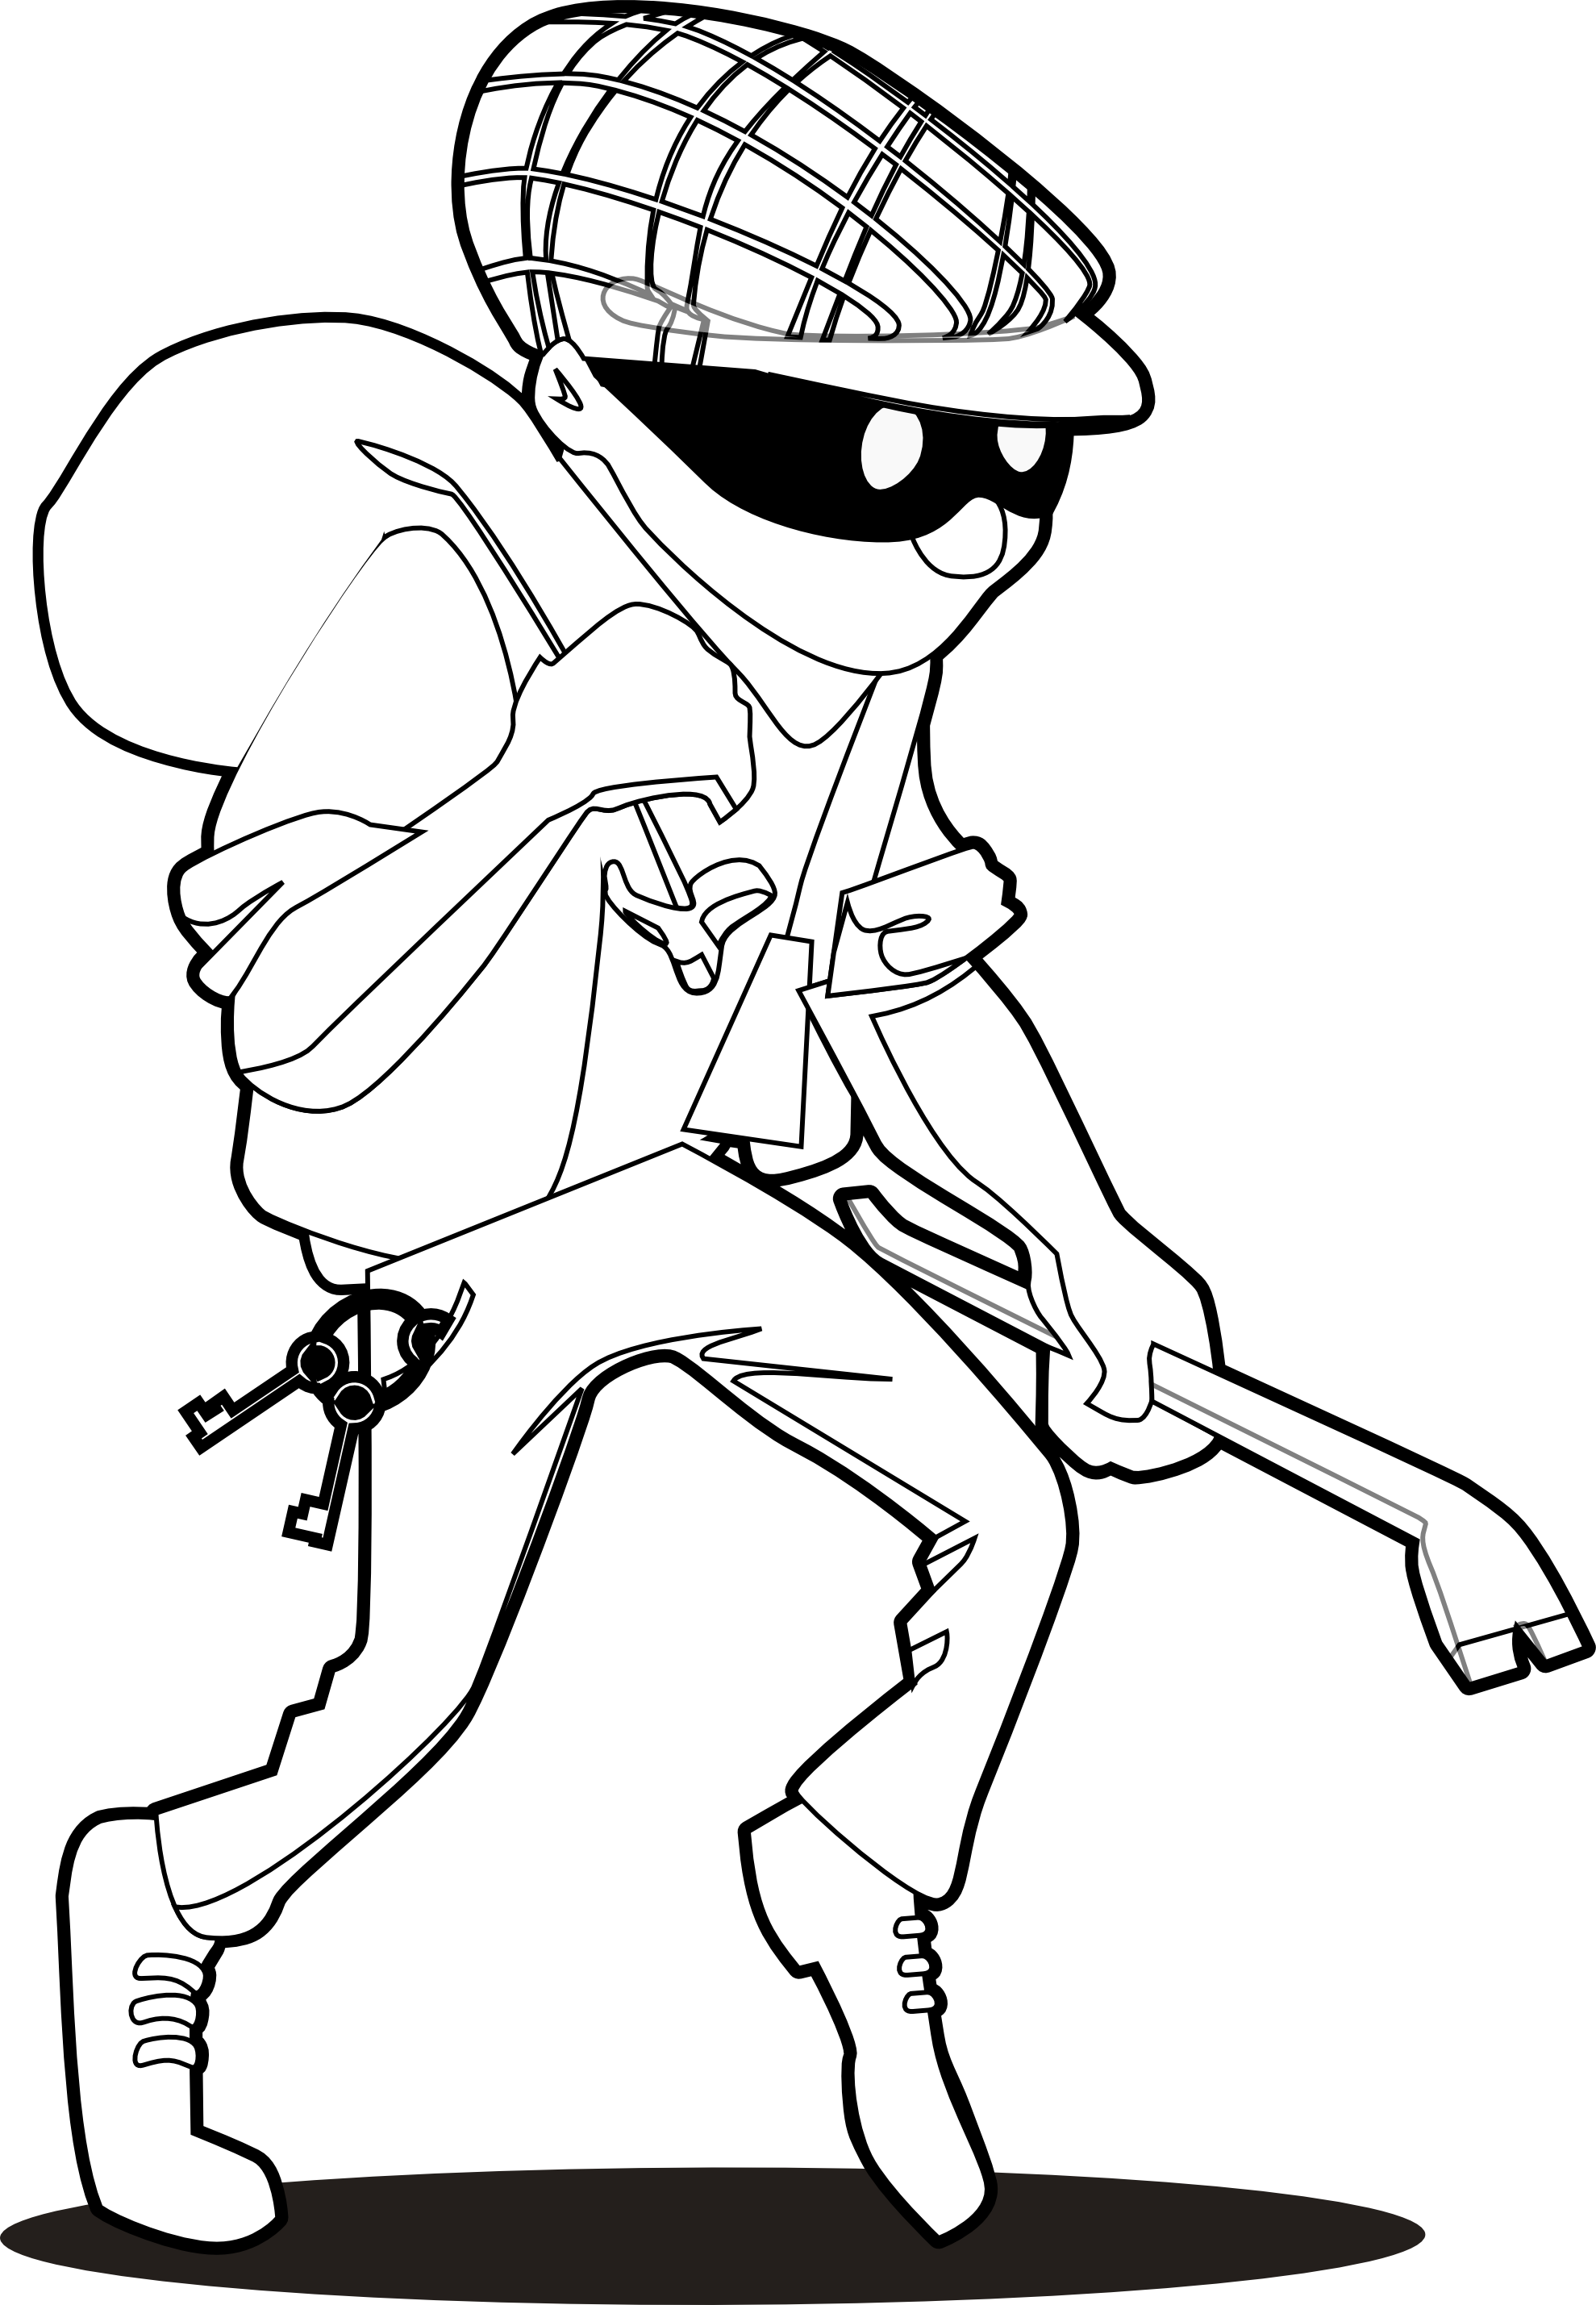 Free Robber Clipart Black And White, Download Free Clip Art.